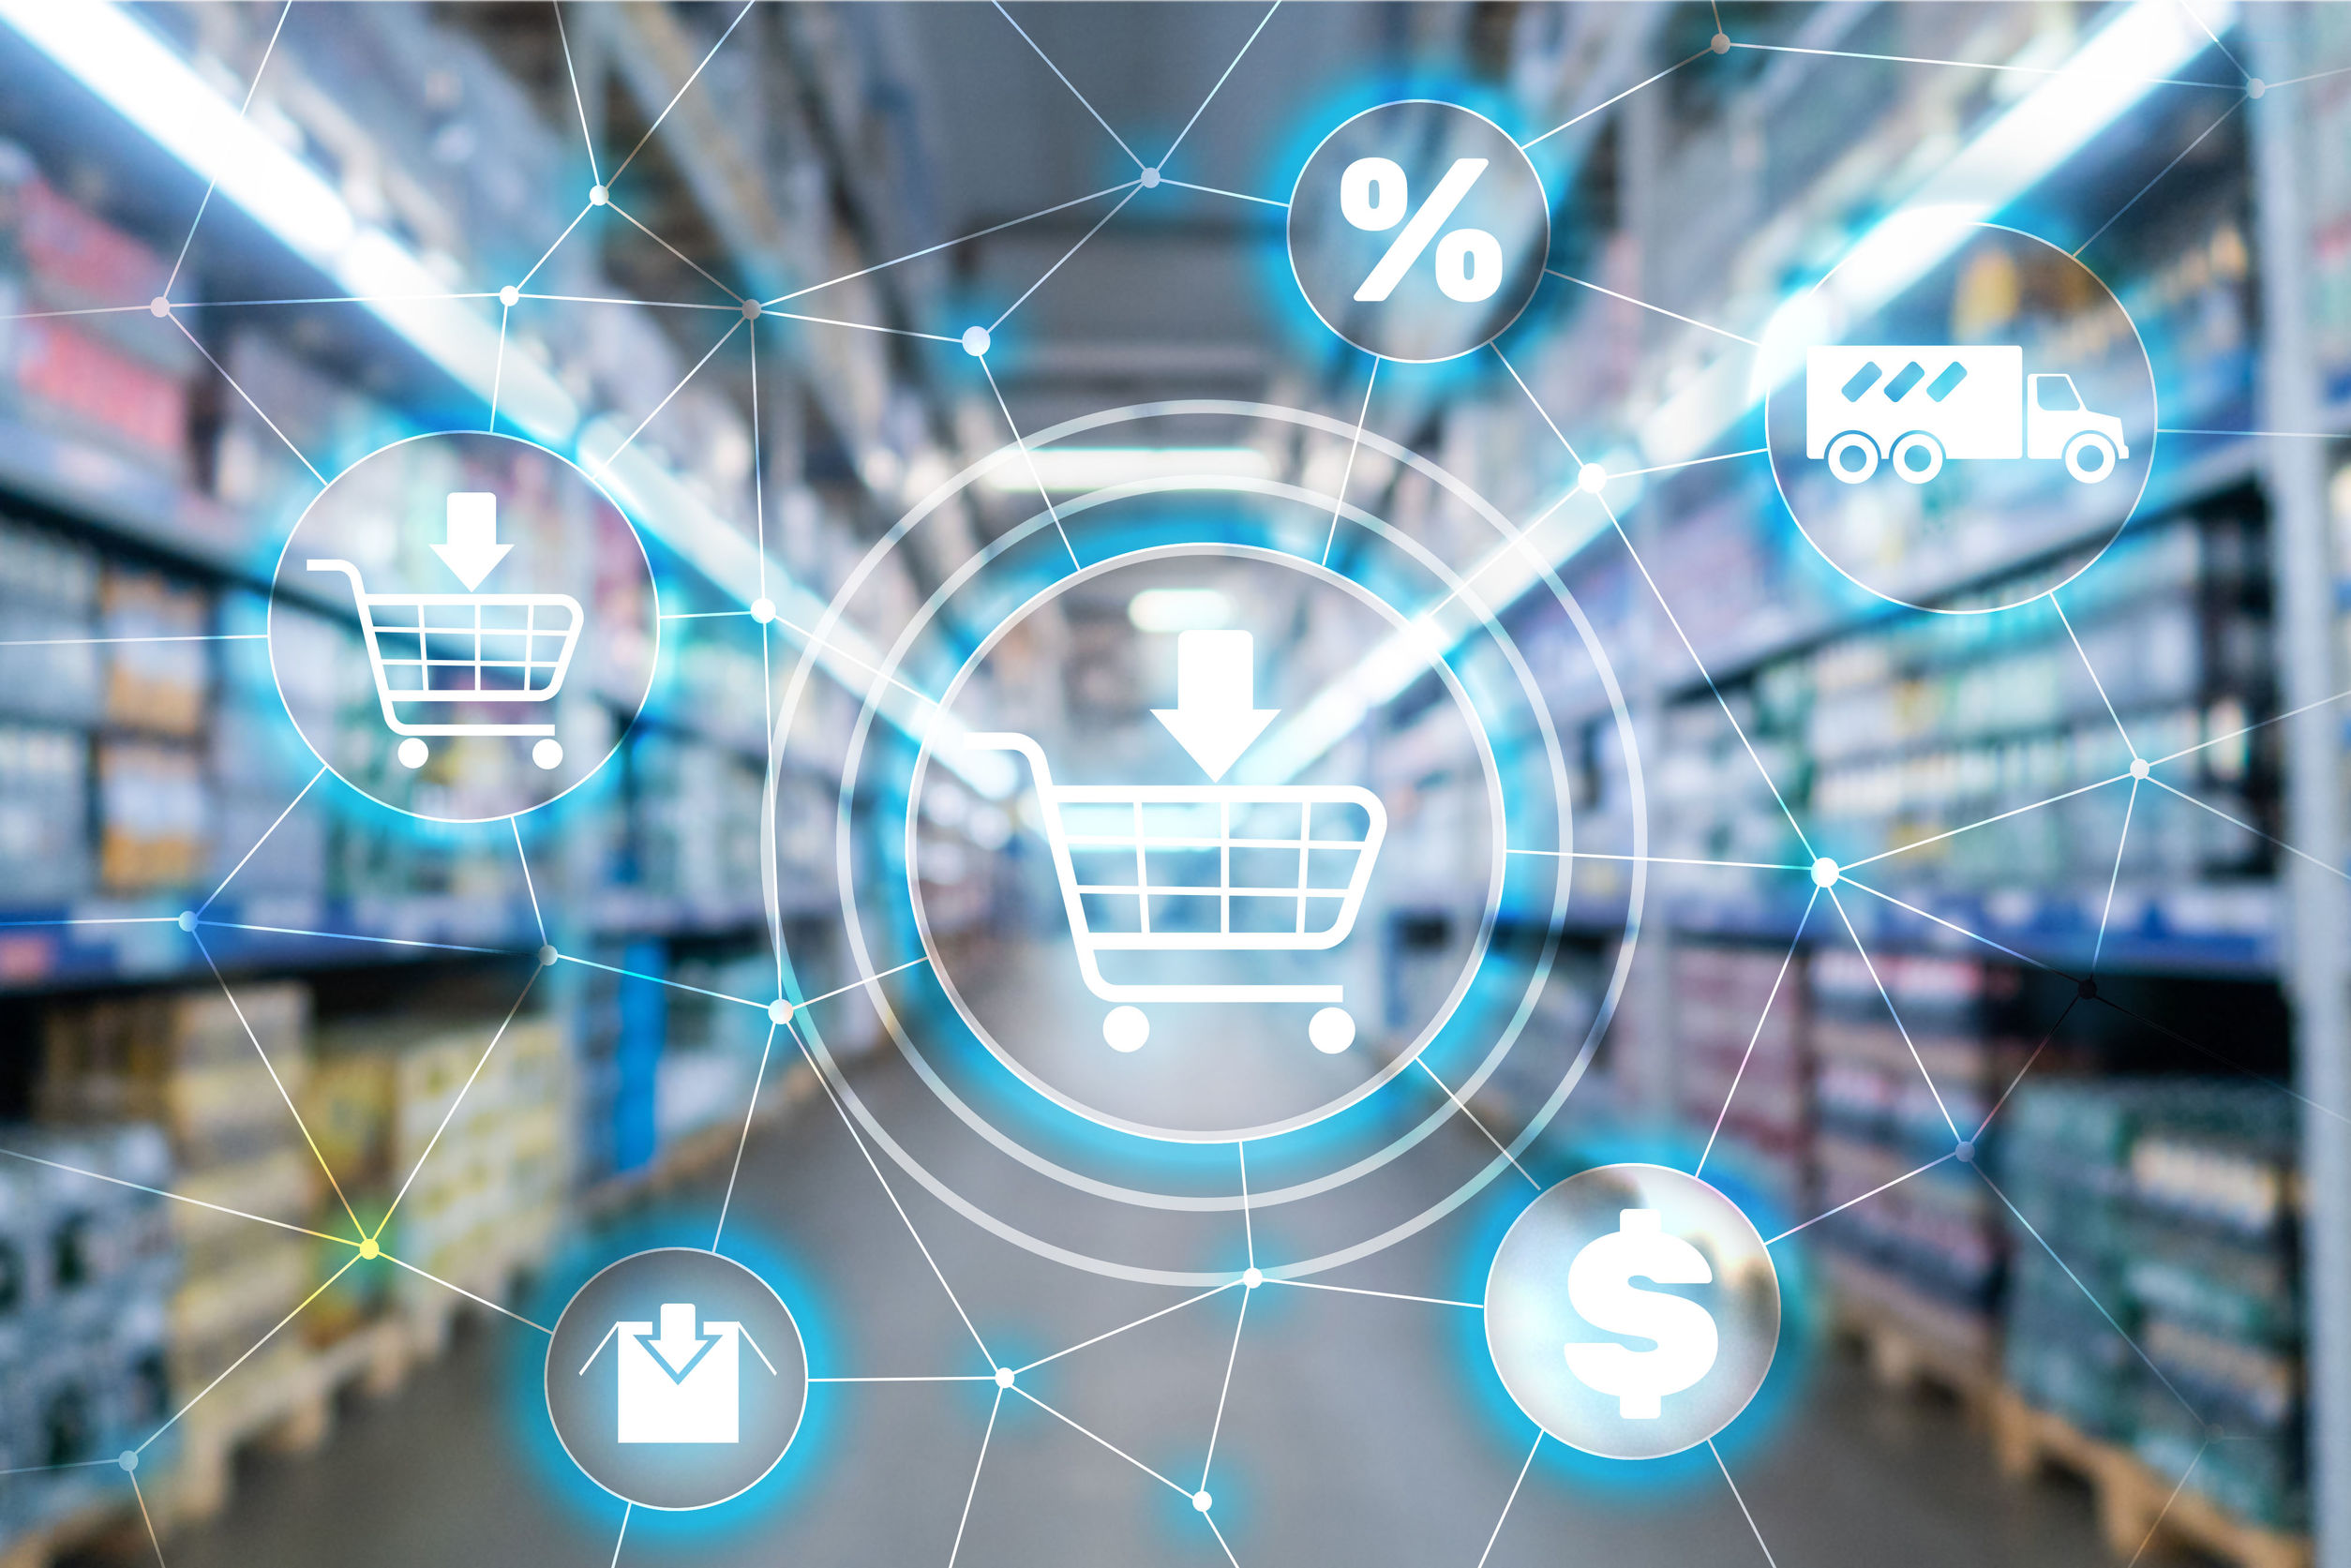 Global Retail Automation Market Size Projected to Reach US$ 26+ Billion by 2027